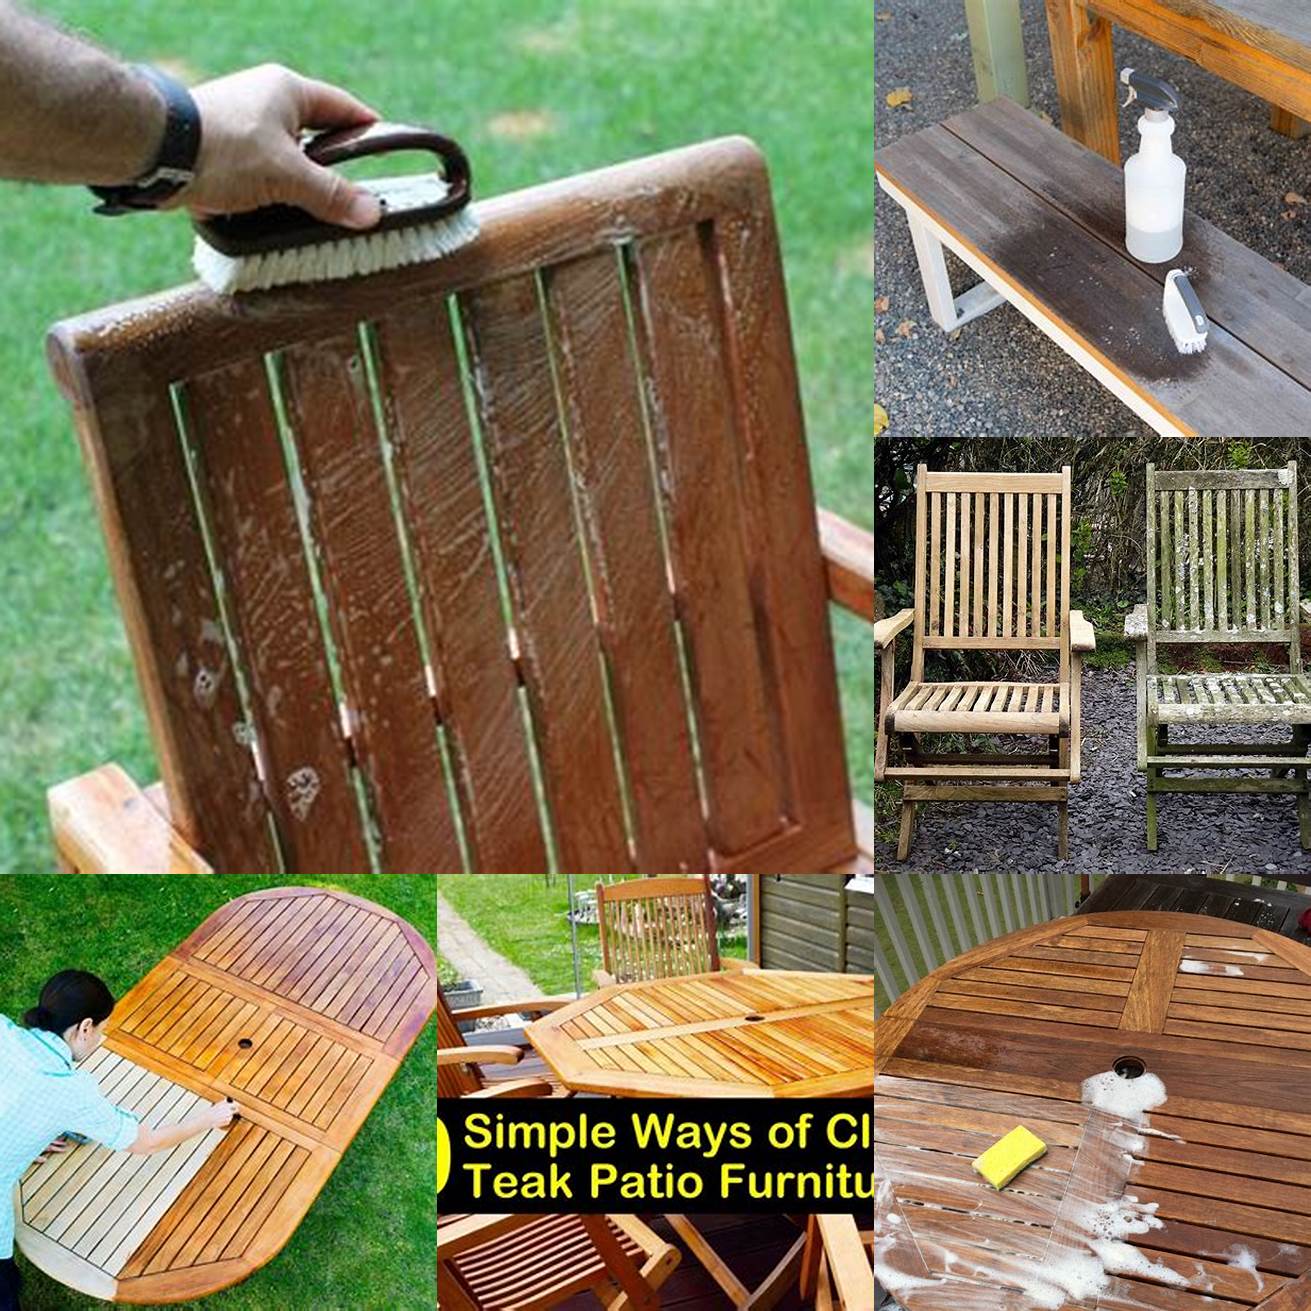 Cleaning Your Teak Furniture